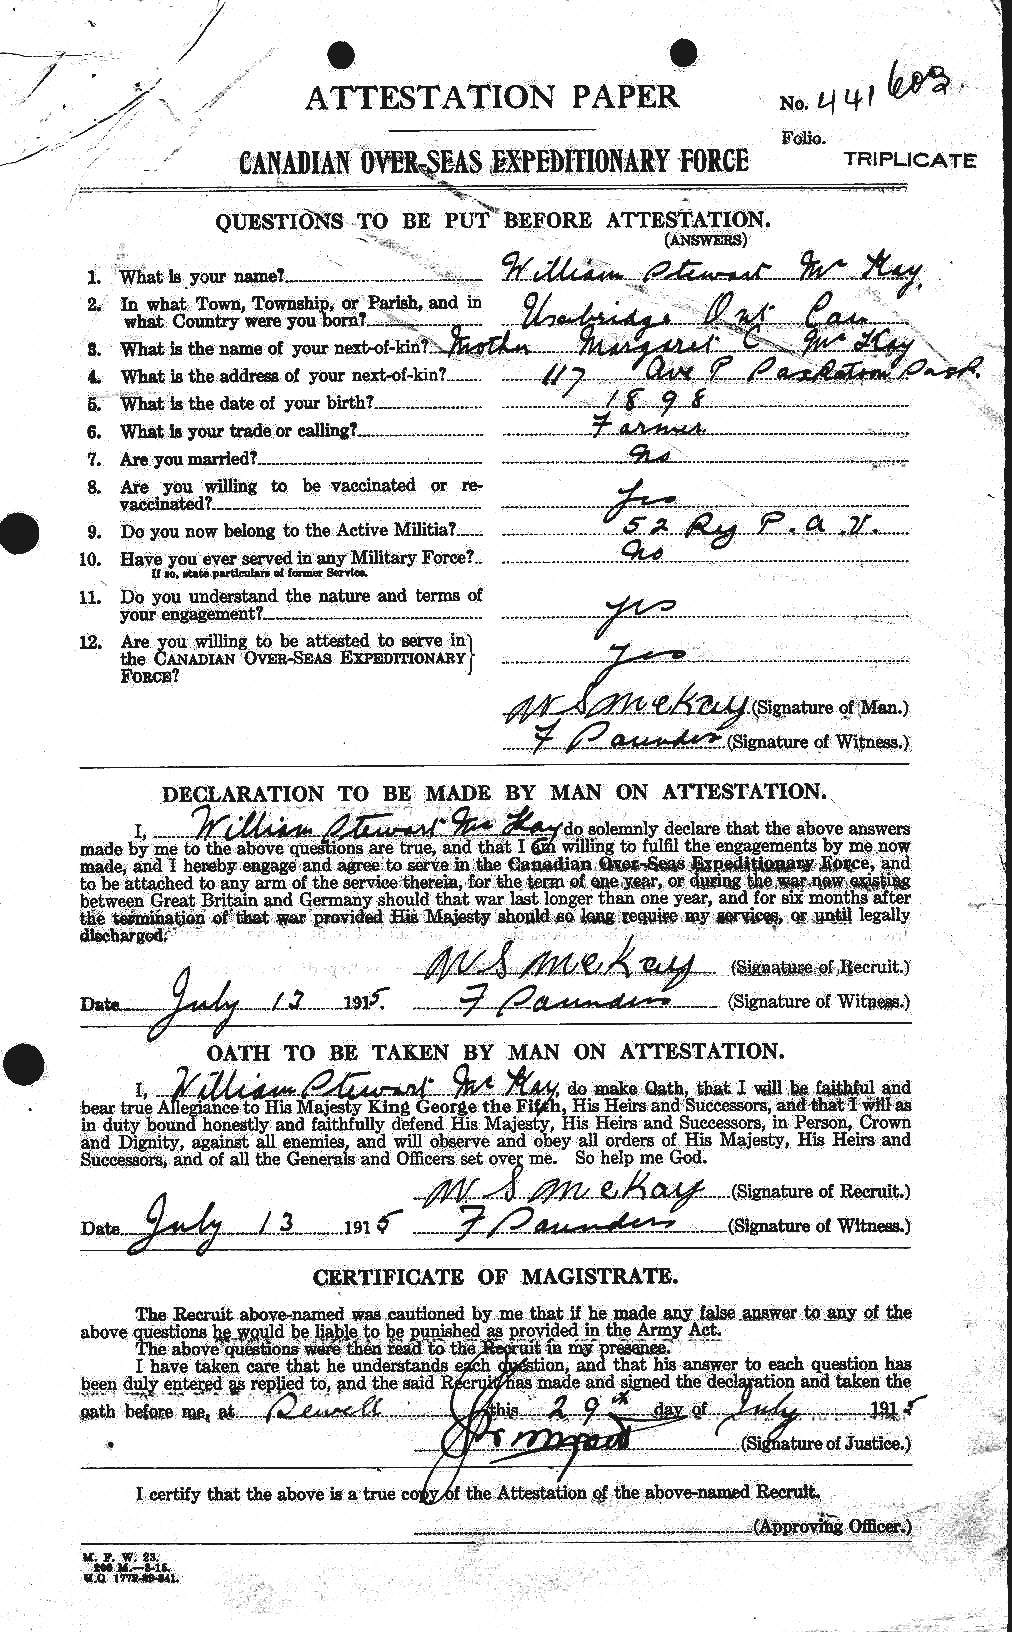 Personnel Records of the First World War - CEF 530322a